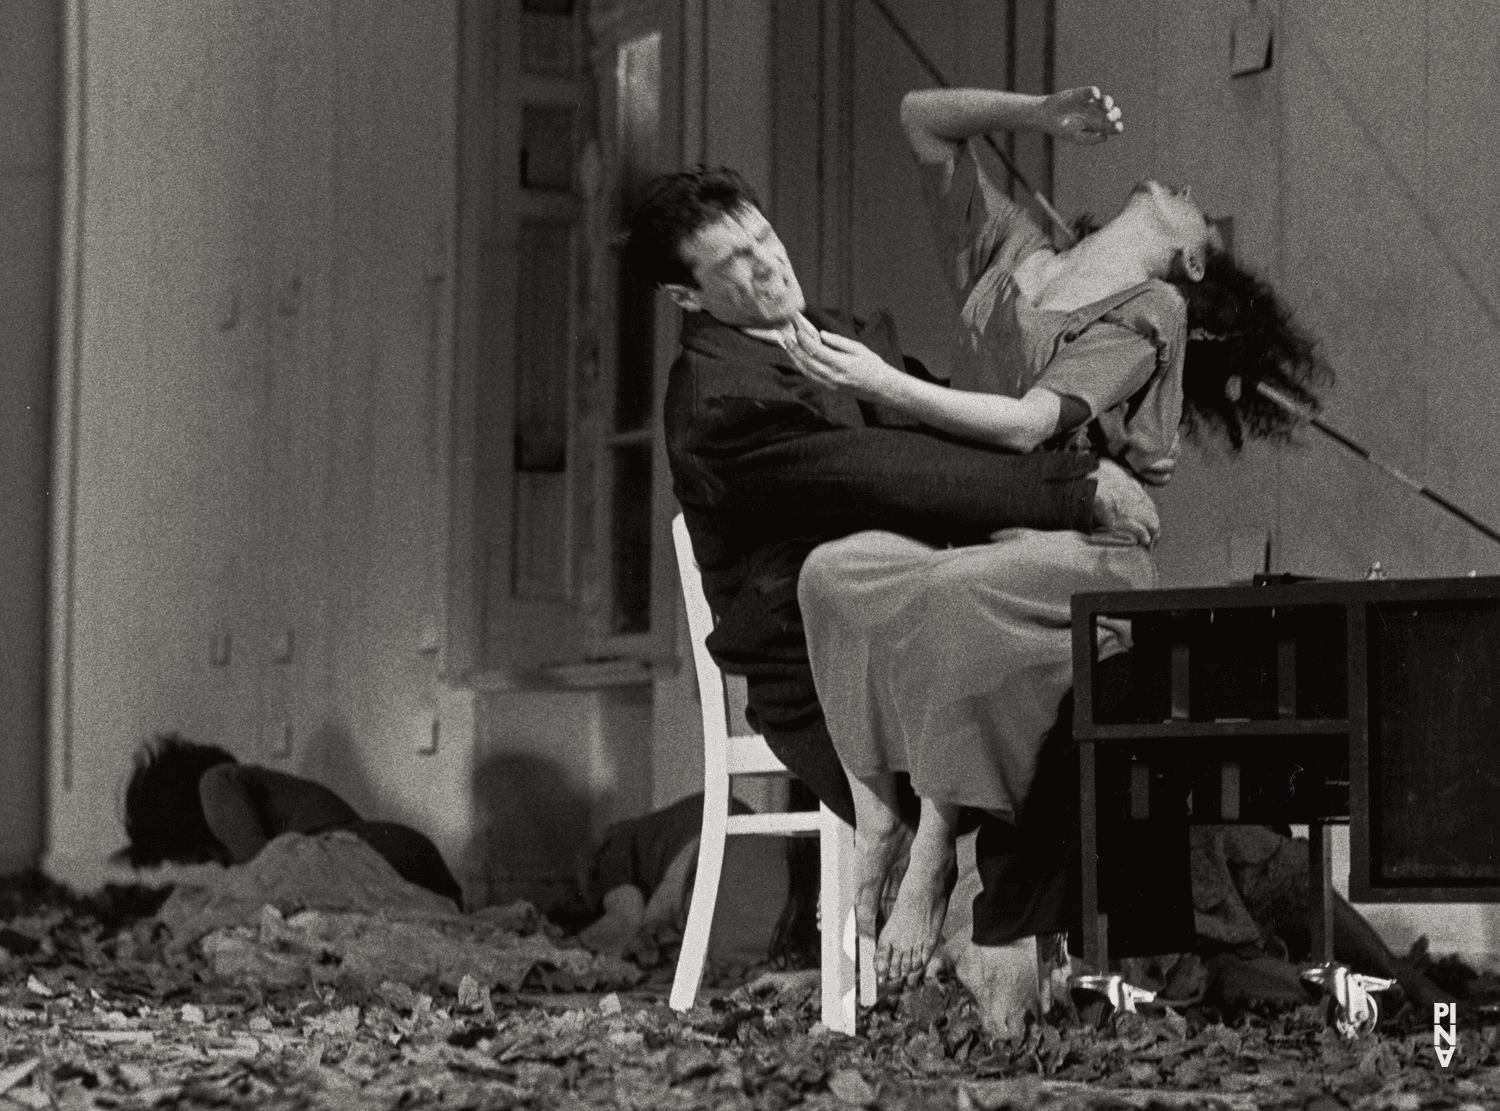 Antonio Carallo and Cristiana Morganti in “Bluebeard. While Listening to a Tape Recording of Béla Bartók's Opera "Duke Bluebeard's Castle"” by Pina Bausch